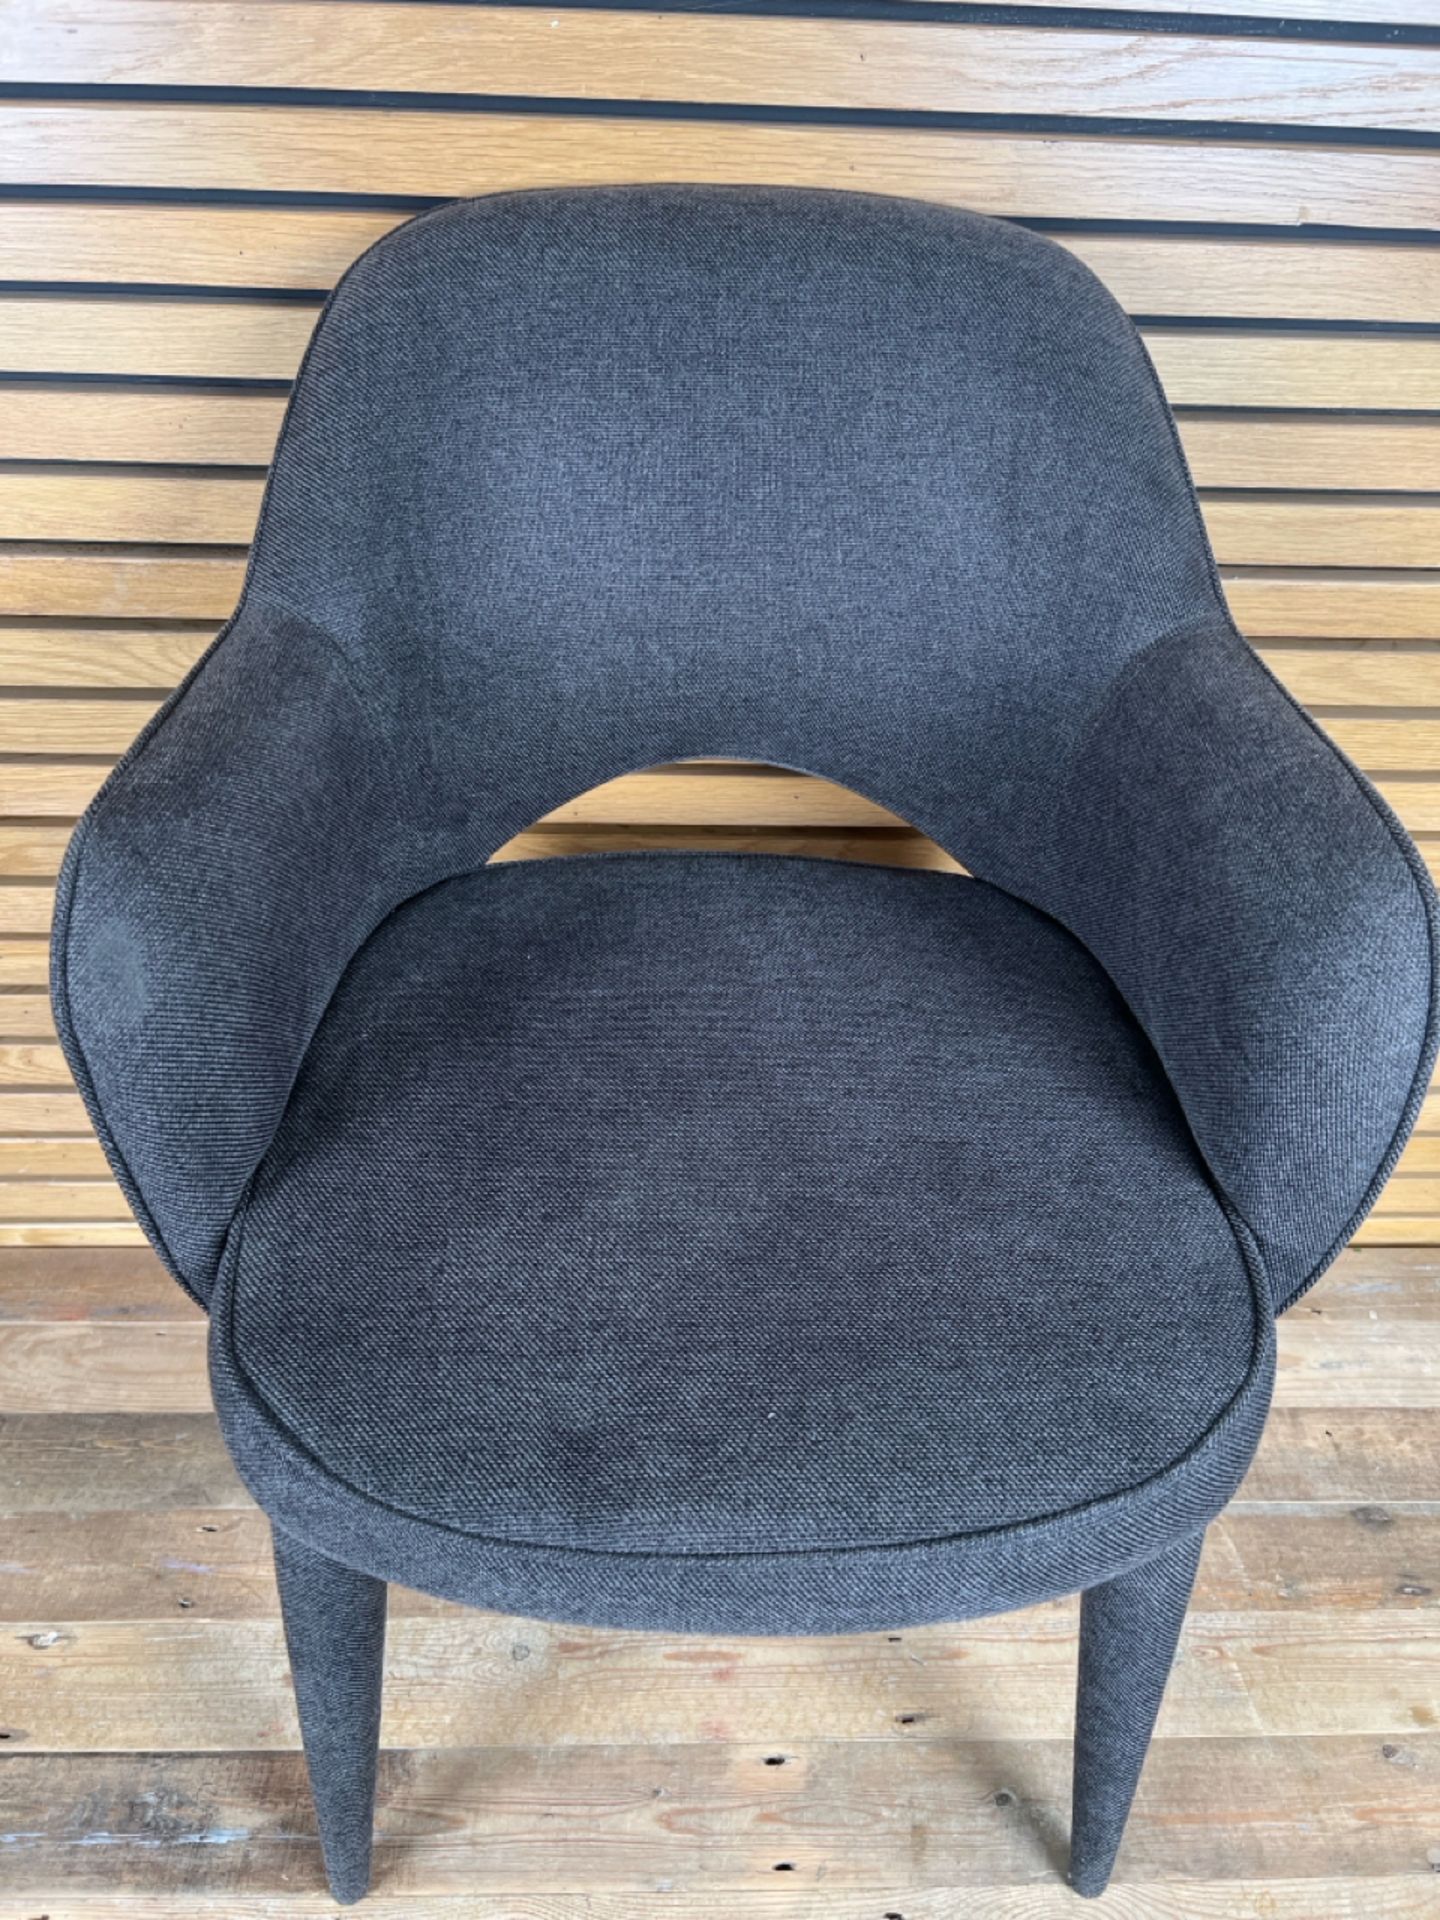 Pols Potten Holy Padded Armchair Textile Grey - Image 5 of 5